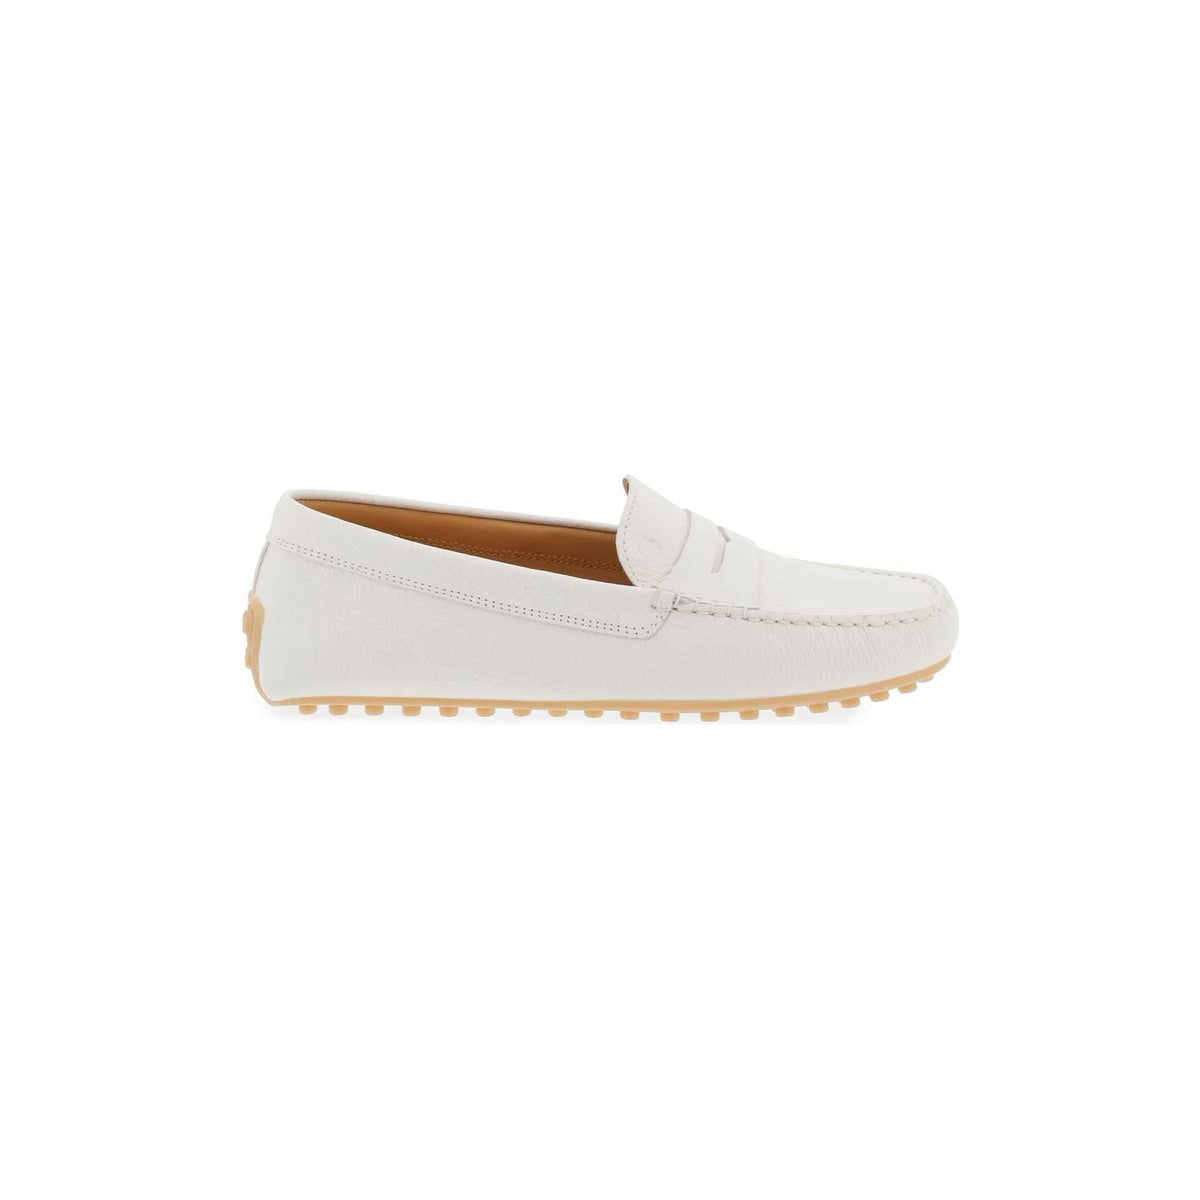 TOD'S - City Gommino Leather Loafers - JOHN JULIA